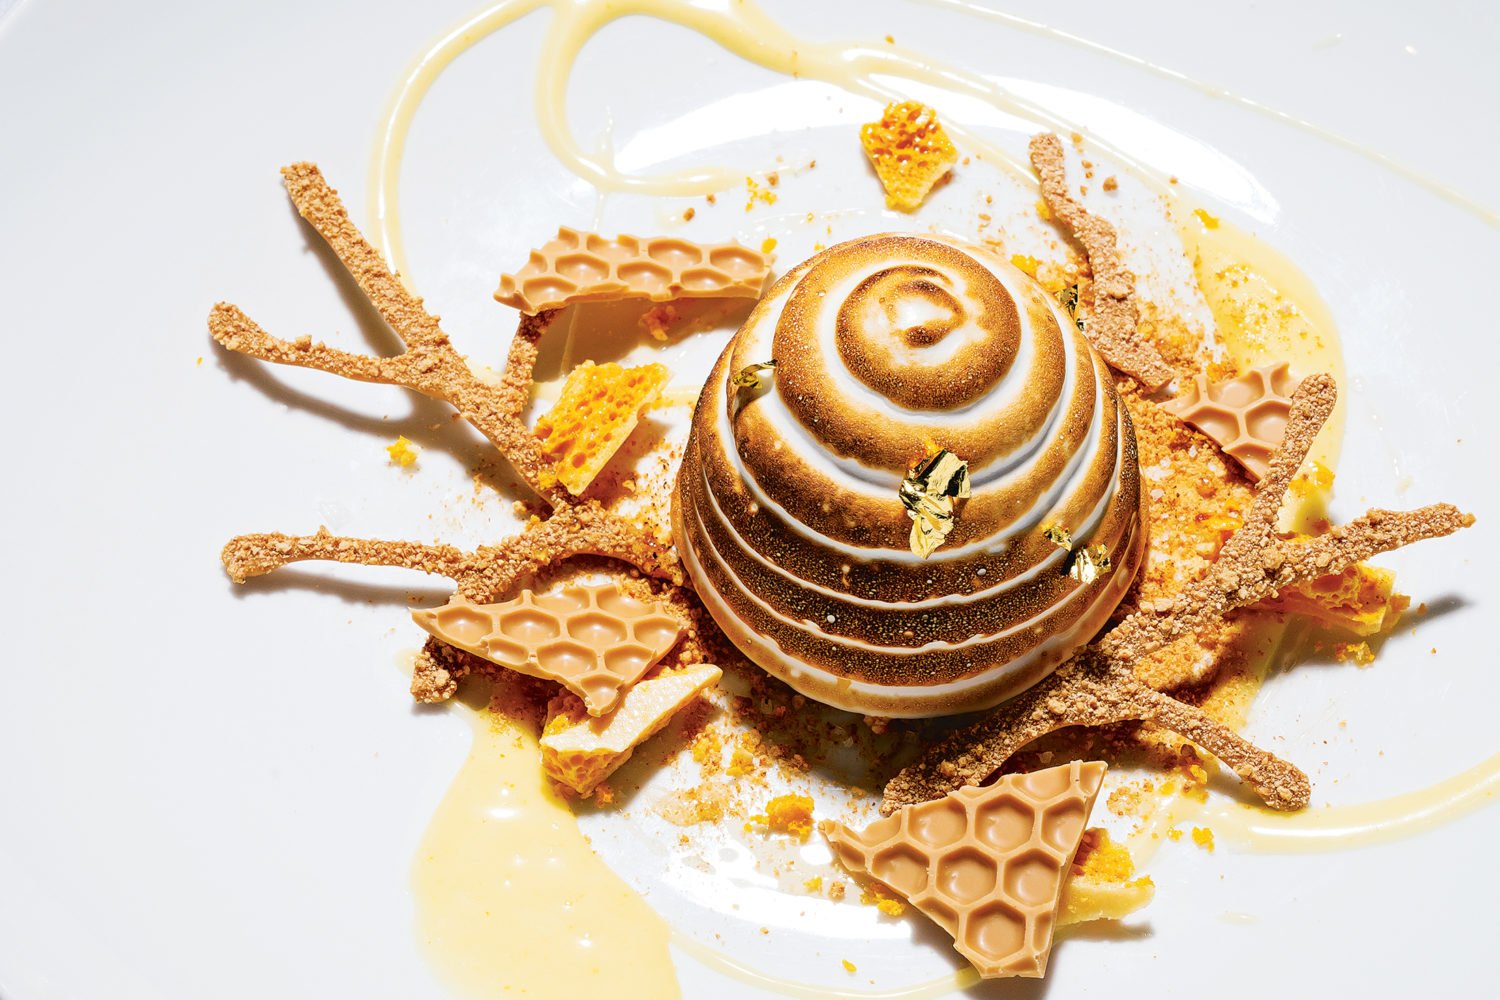 Mirabelle’s “beehive” with lemon curd and meringue. Photograph by Scott Suchman.